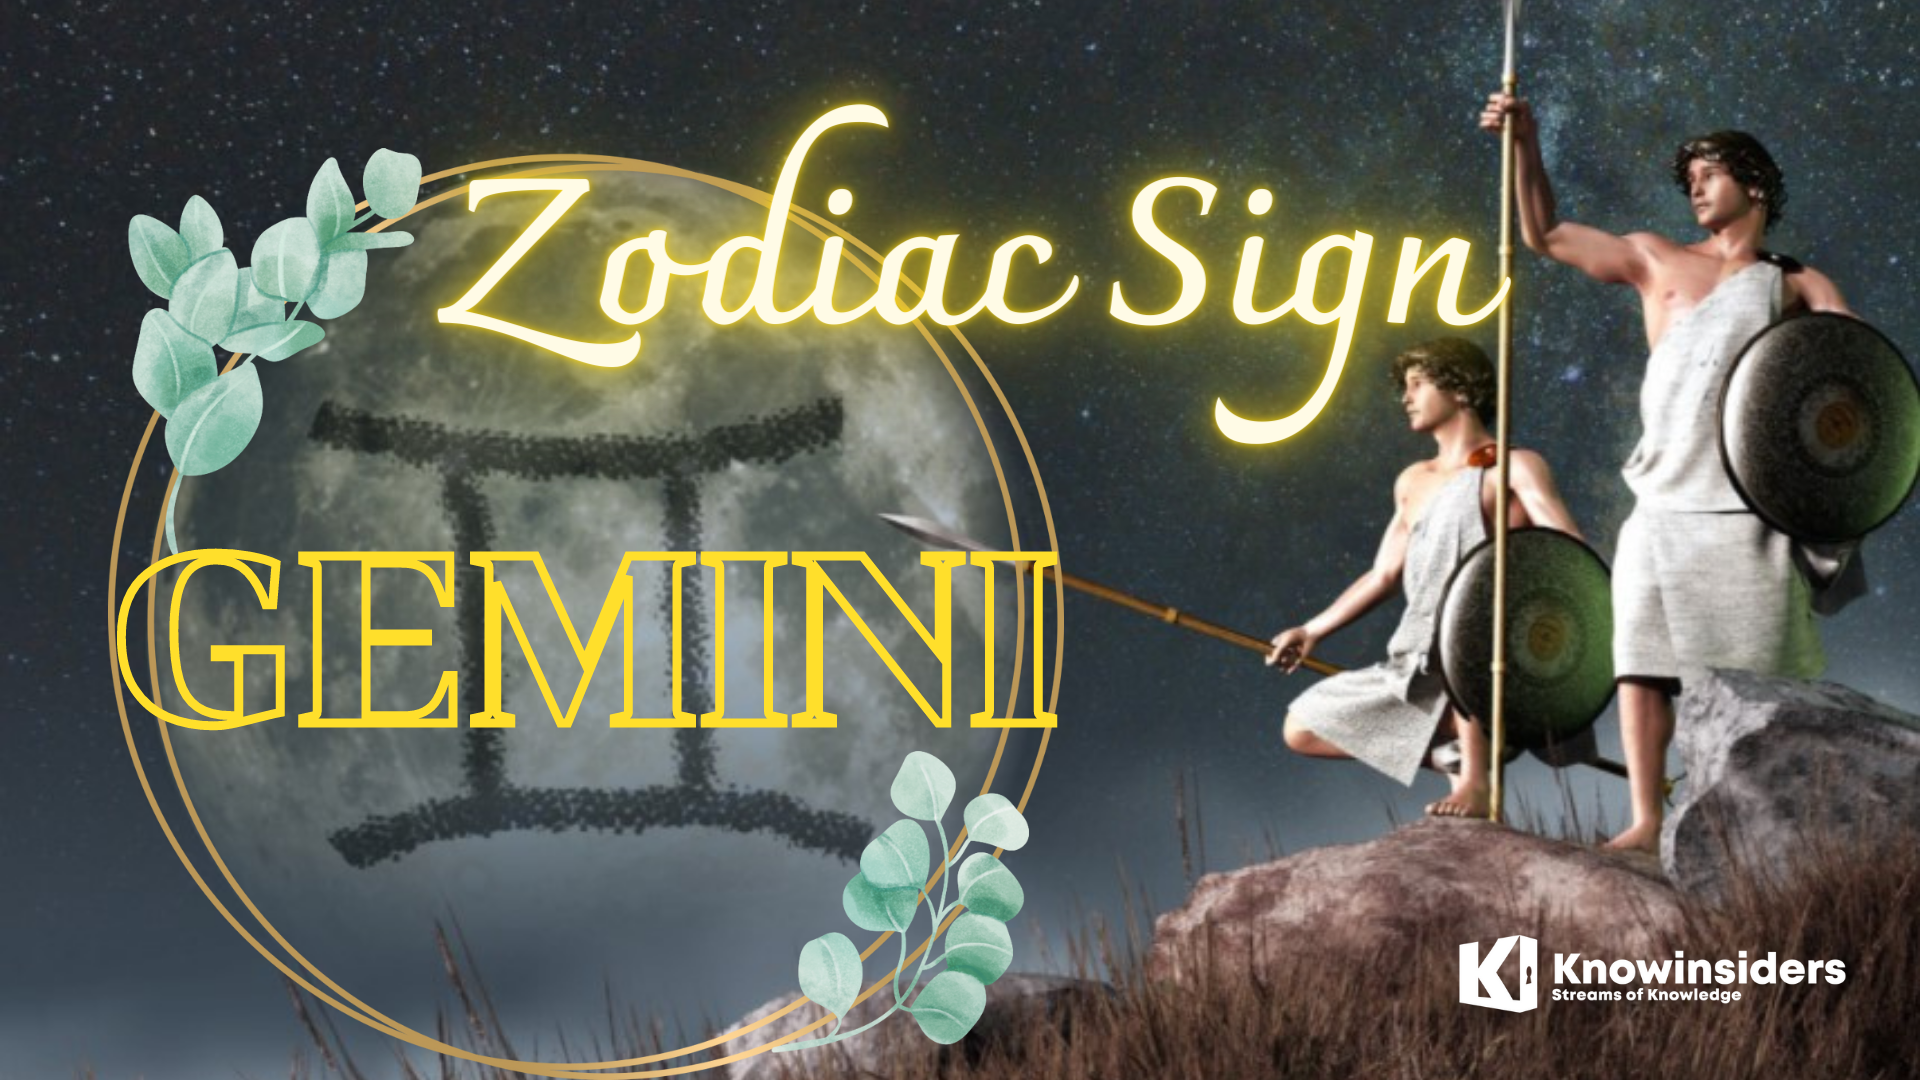 Top 5 Most Loved Zodiac Signs According to Astrology